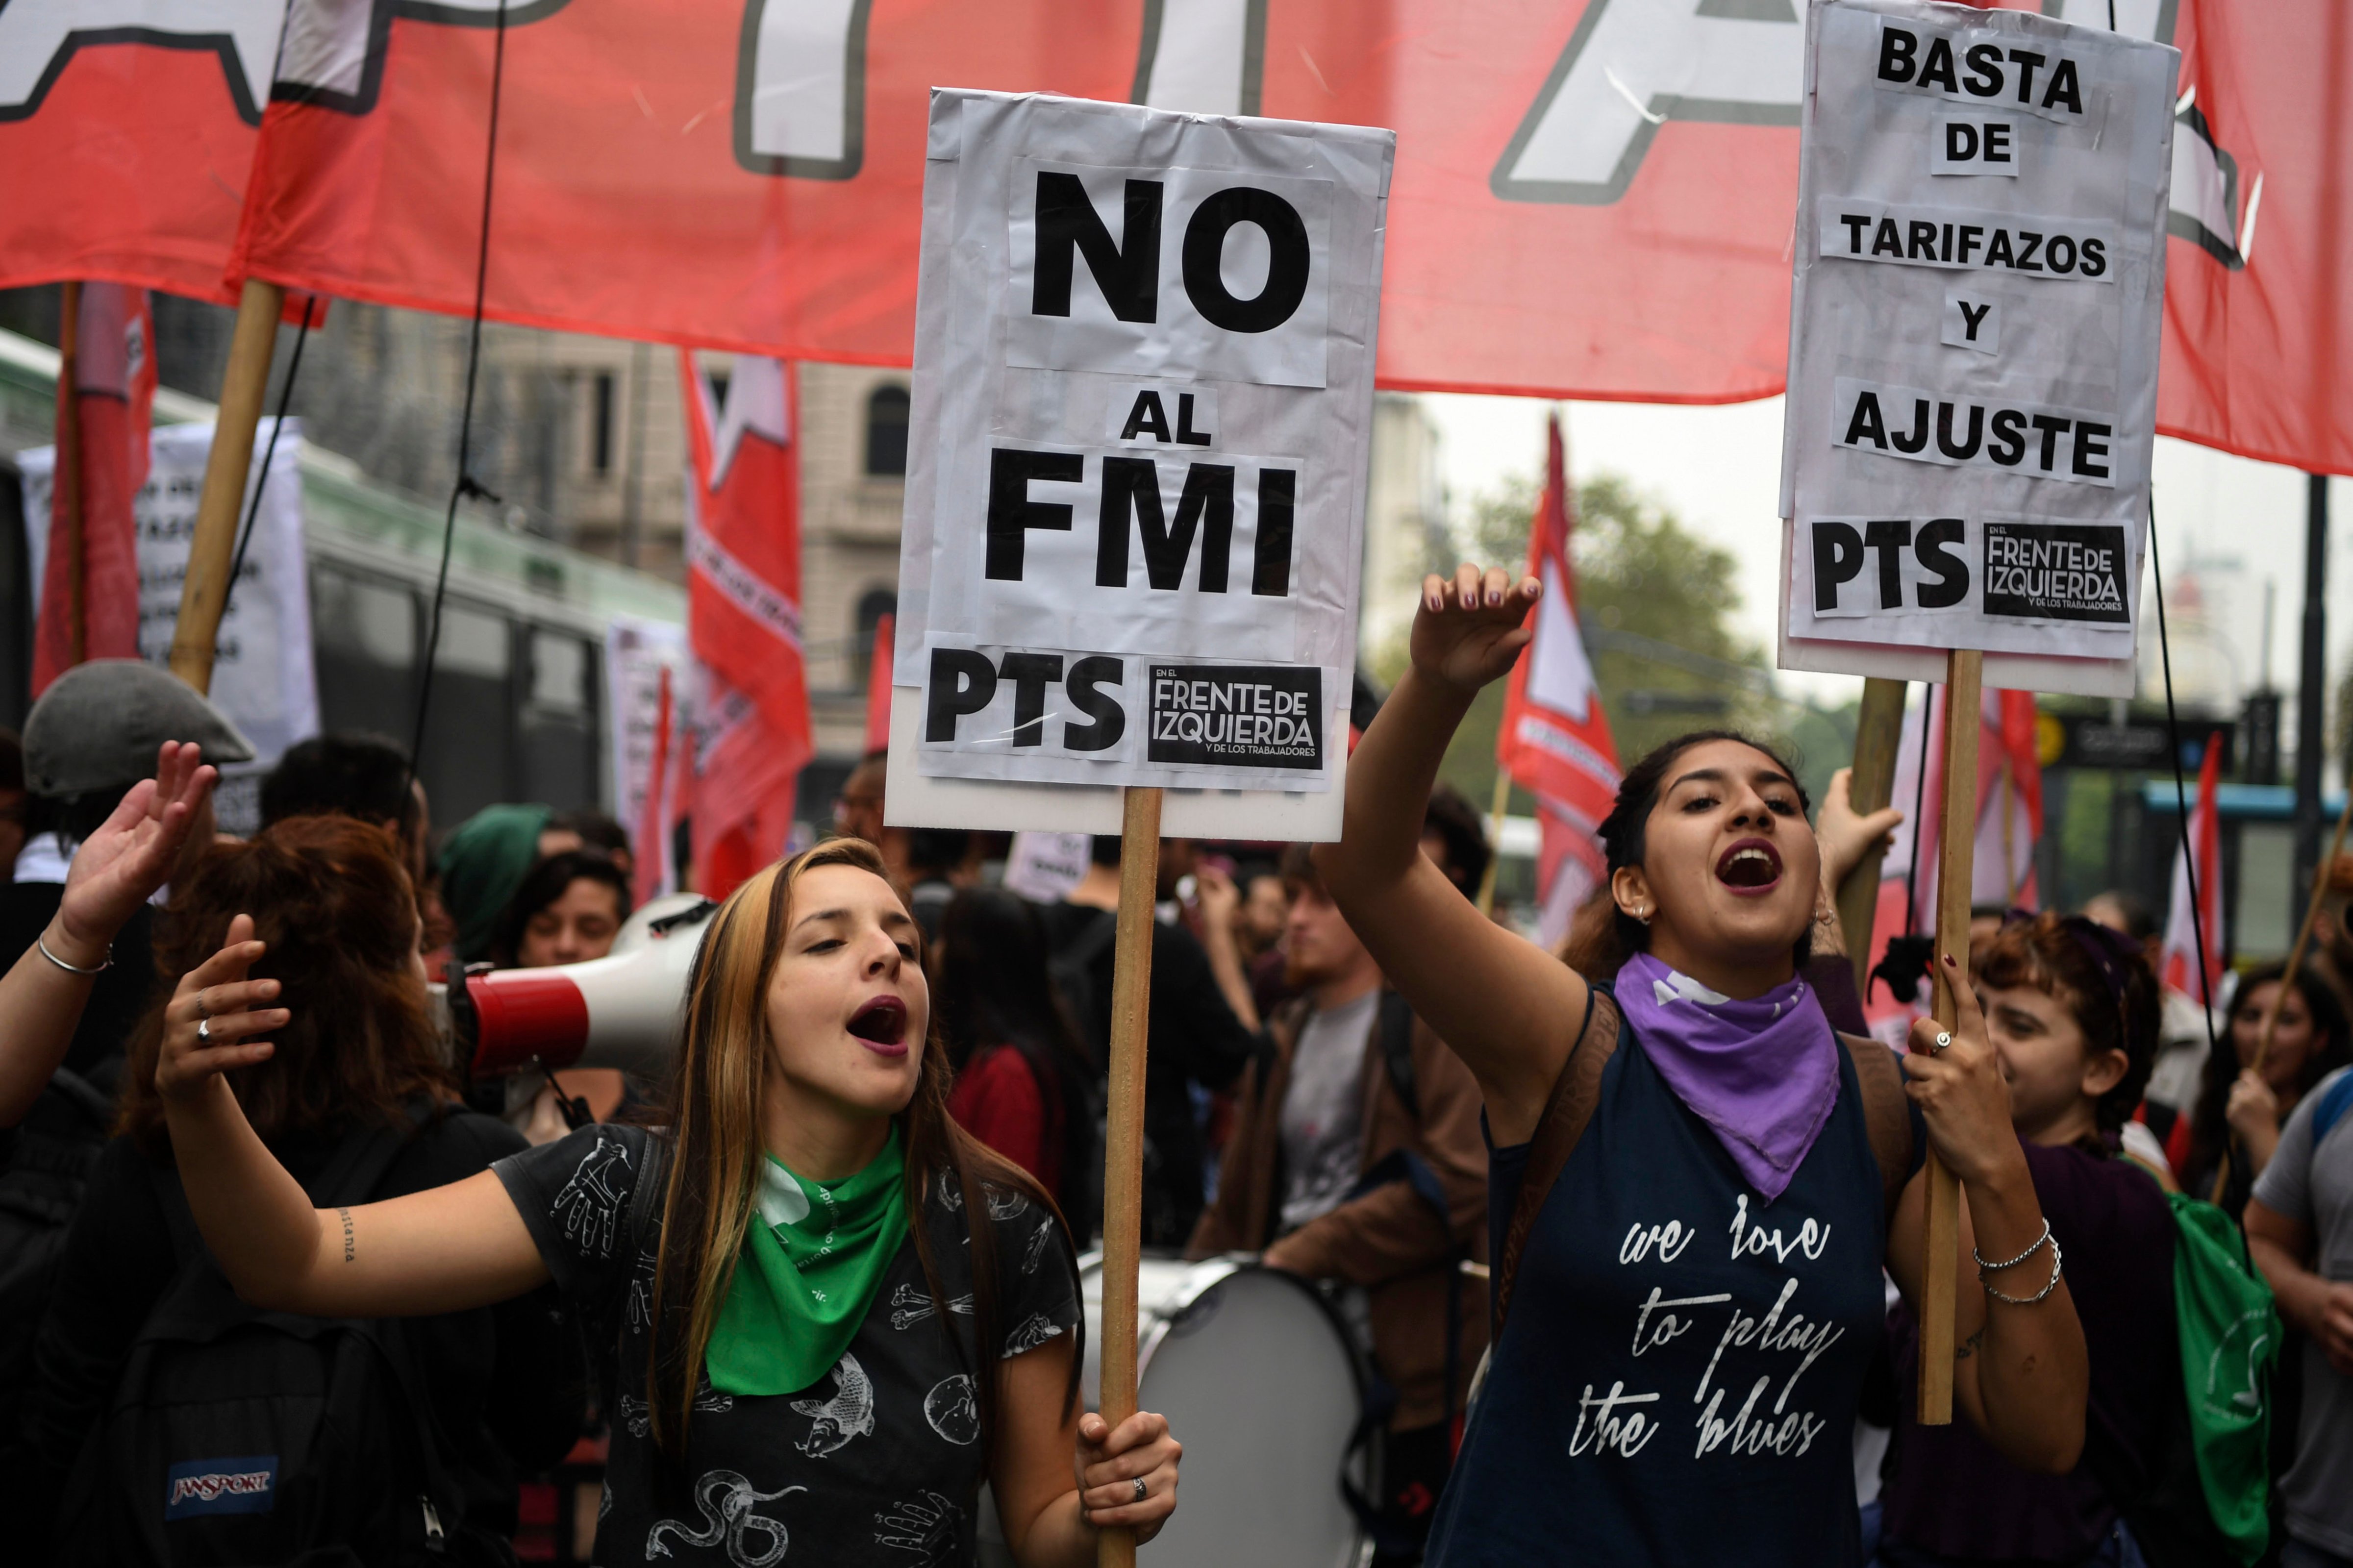 Members of leftist organizations demonstrate outside the National Congress against the government's negotiations with the IMF while legislators debate a bill to put a stop on public services taxes raising in Buenos Aires, on May 09, 2018. - Argentina opened talks with the International Monetary Fund on Tuesday to seek a financial aid package, 17 years after the country defaulted on its debt and 12 years after cutting ties with the fund. (Photo by EITAN ABRAMOVICH / AFP)        (Photo credit should read EITAN ABRAMOVICH/AFP/Getty Images) (EITAN ABRAMOVICH&mdash;AFP/Getty Images)